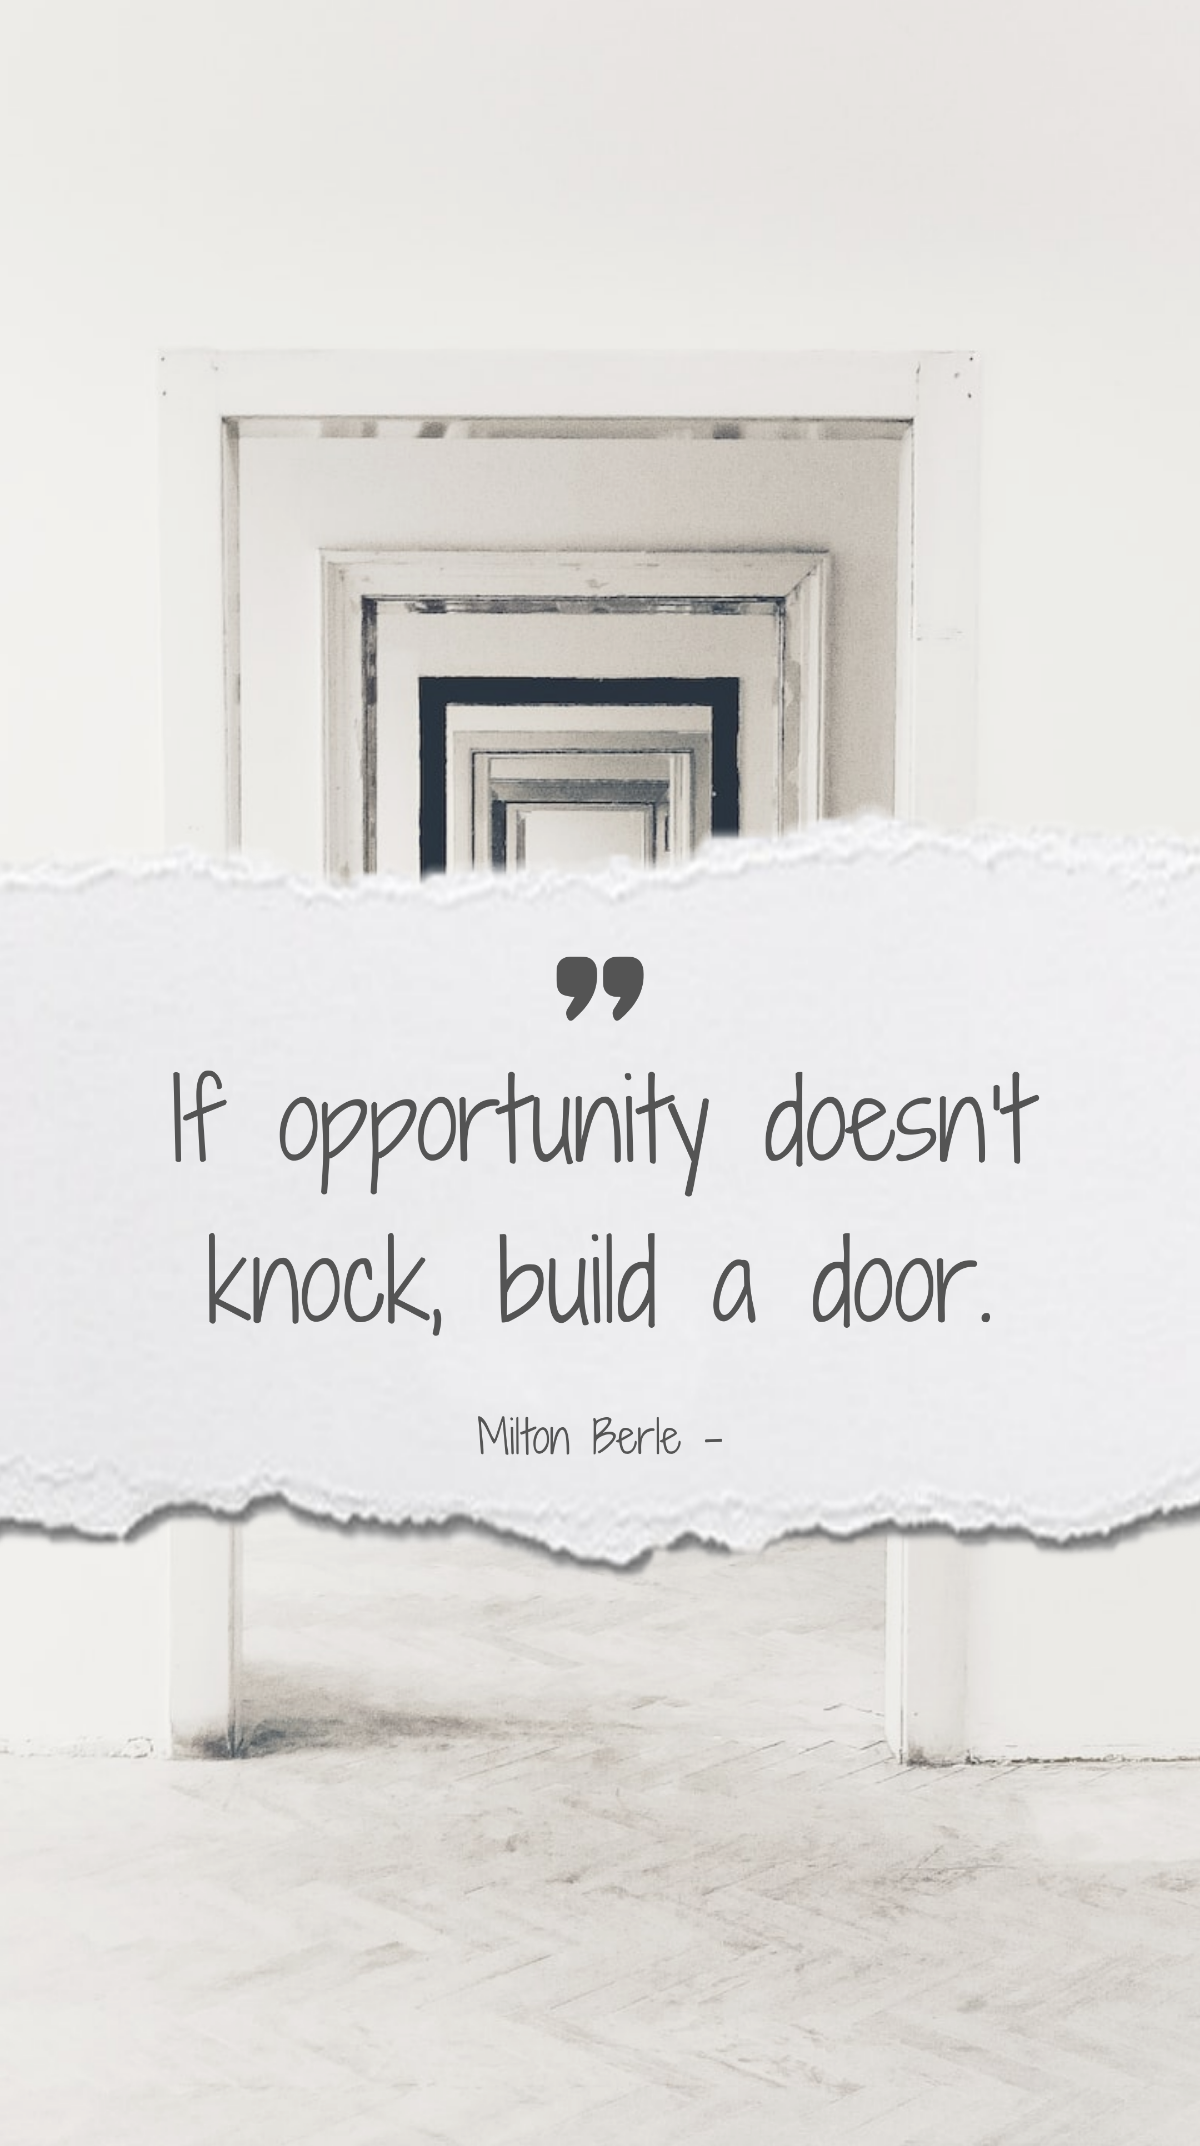 Milton Berle - If opportunity doesn’t knock, build a door. Template